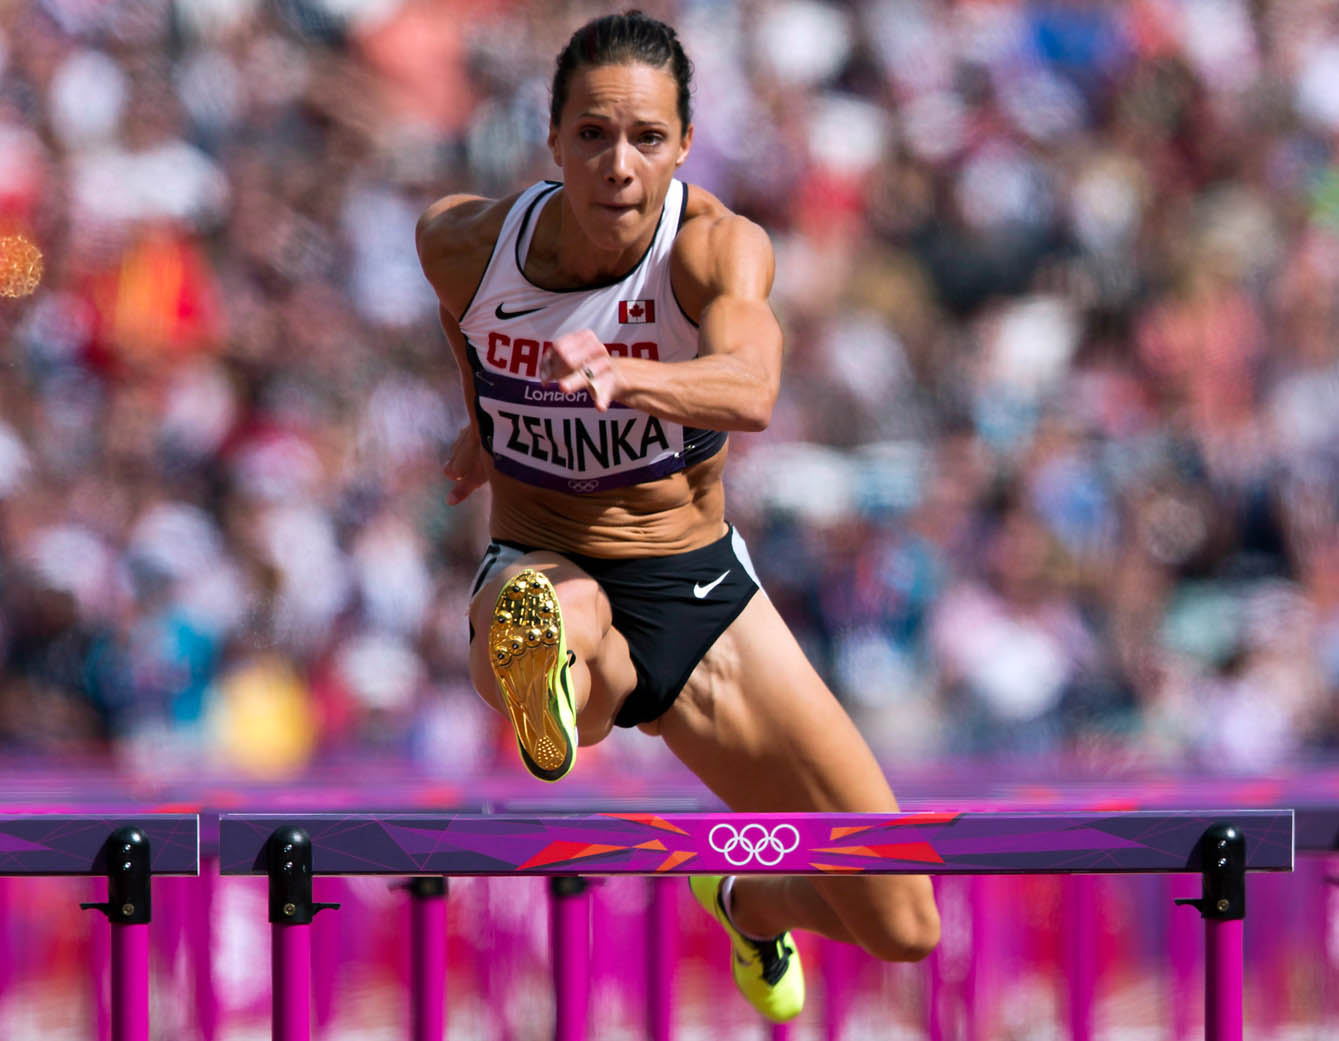 Jessica Zelinka clears the final hurdle during the 100m hurdles portion of Women's Heptathlon at the Olympic Games in London